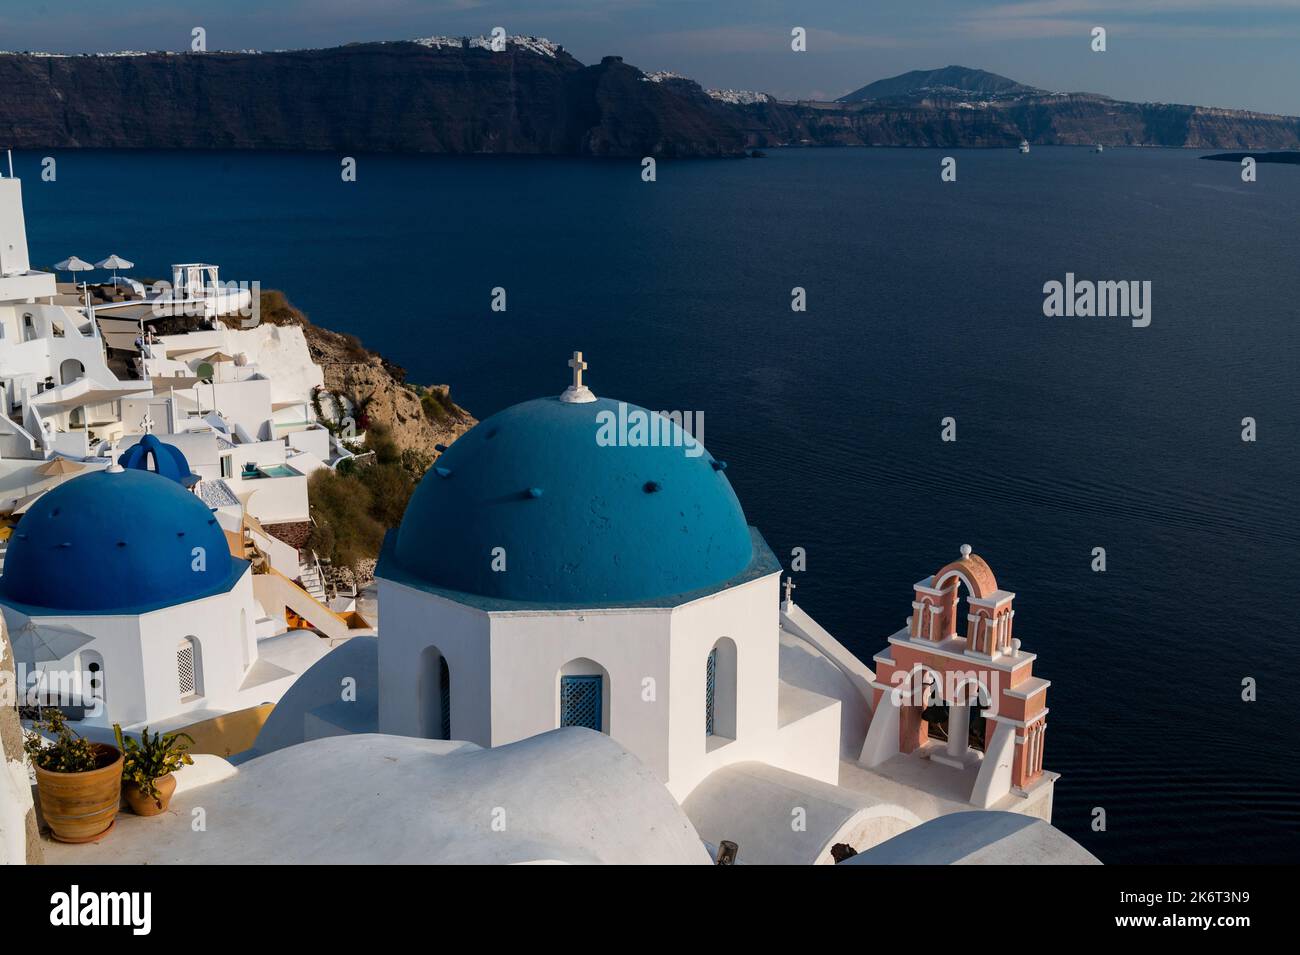 View of the town of Oia with its limewashed houses and churches with blue domes. Santorini is one of the Cyclades islands in the Aegean Sea known for Stock Photo